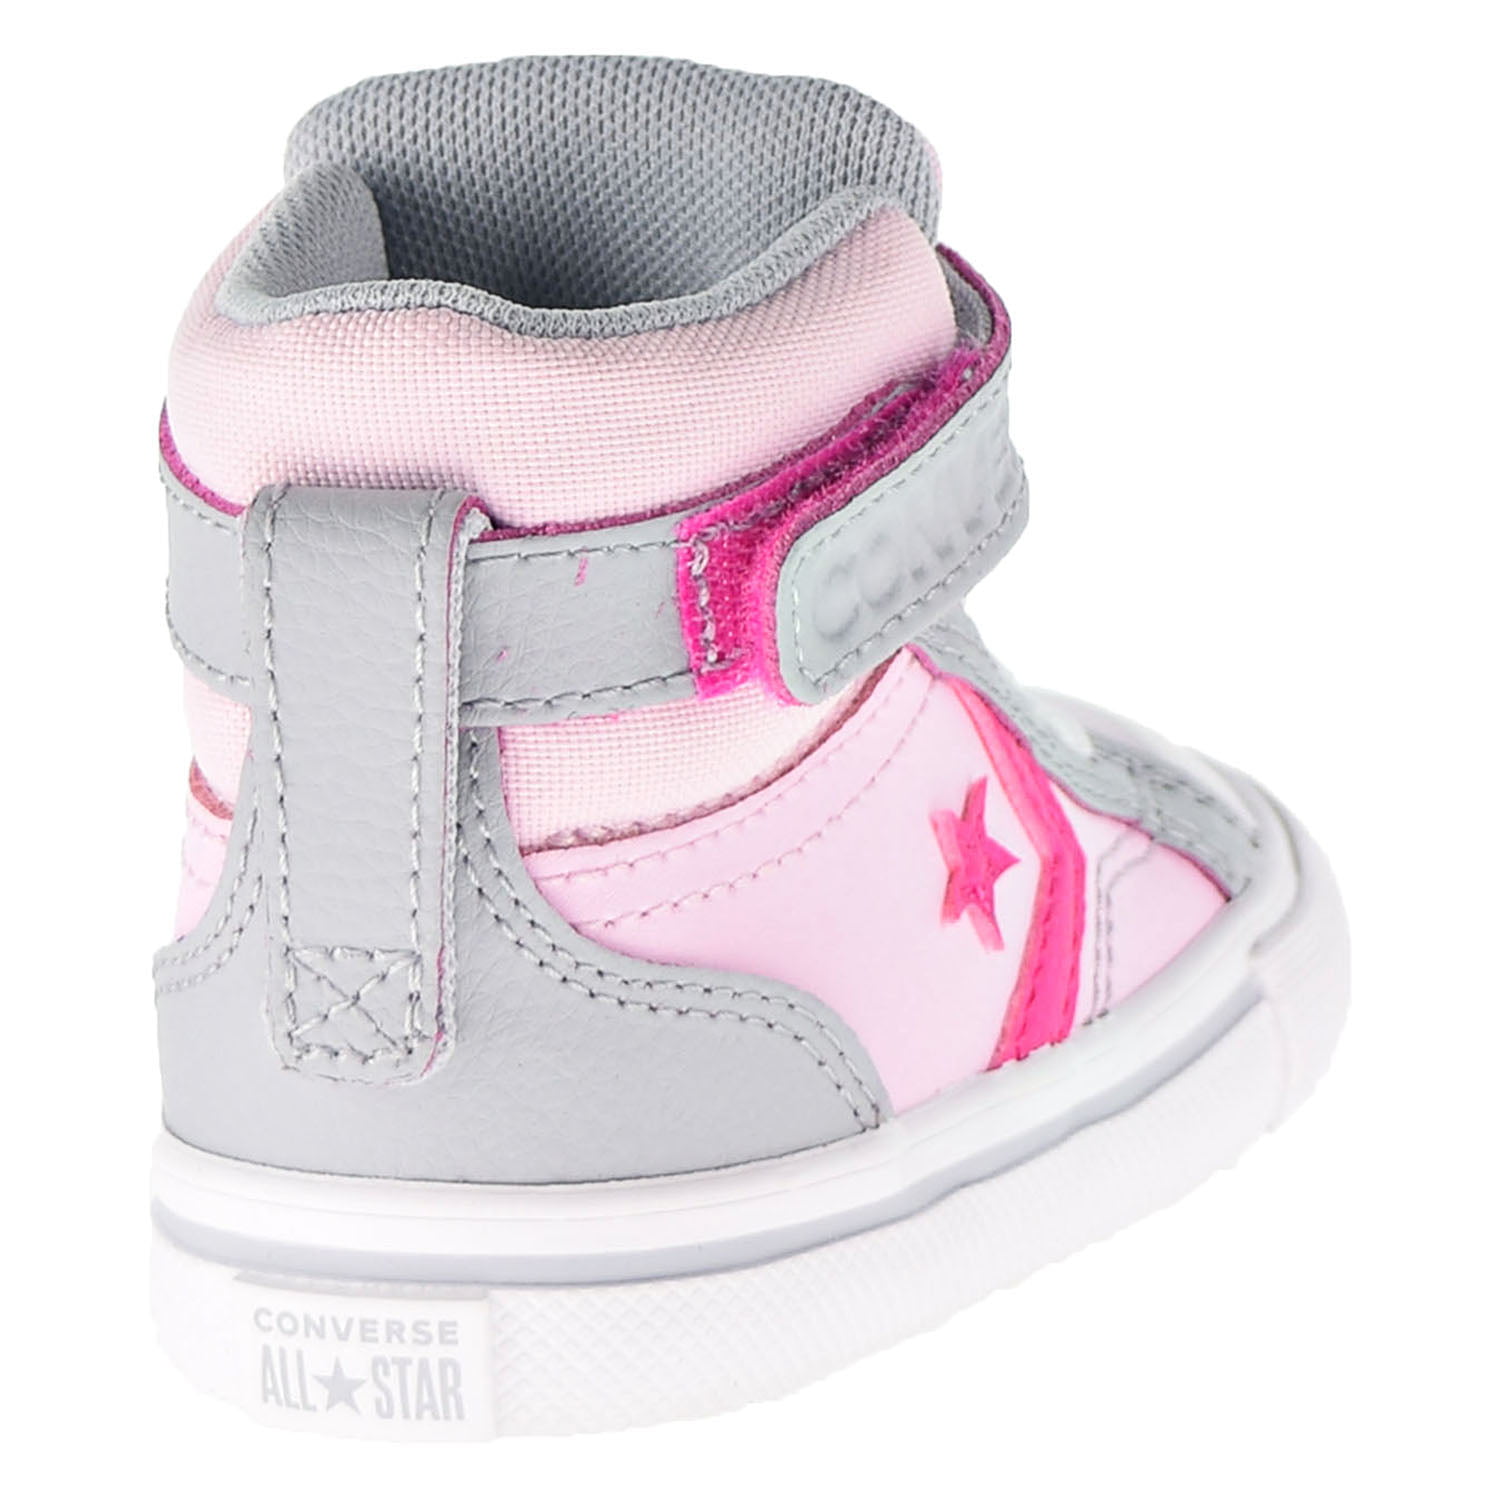 Converse Pro Blaze Two-Tone Leather M 766052c Foam-Wolf Hi Shoes (2 Pink US) Grey Toddler Strap